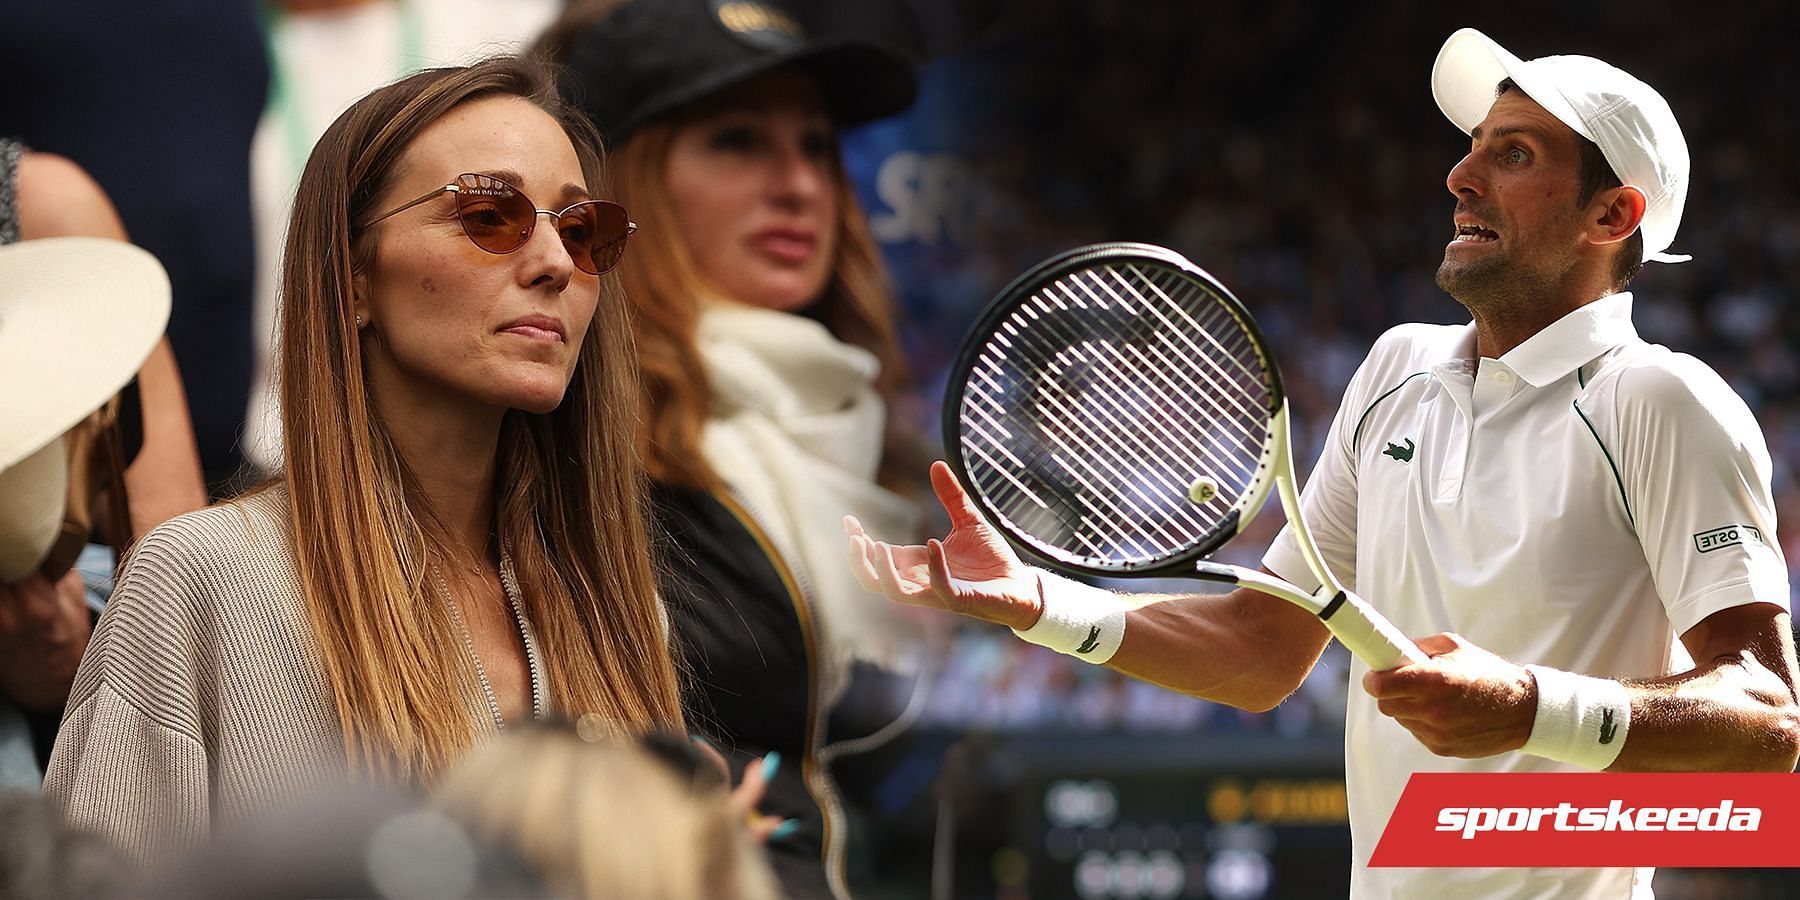 Jelena was not happy with the &quot;anti-vax poster boy&quot; tag on her husband Novak Djokovic